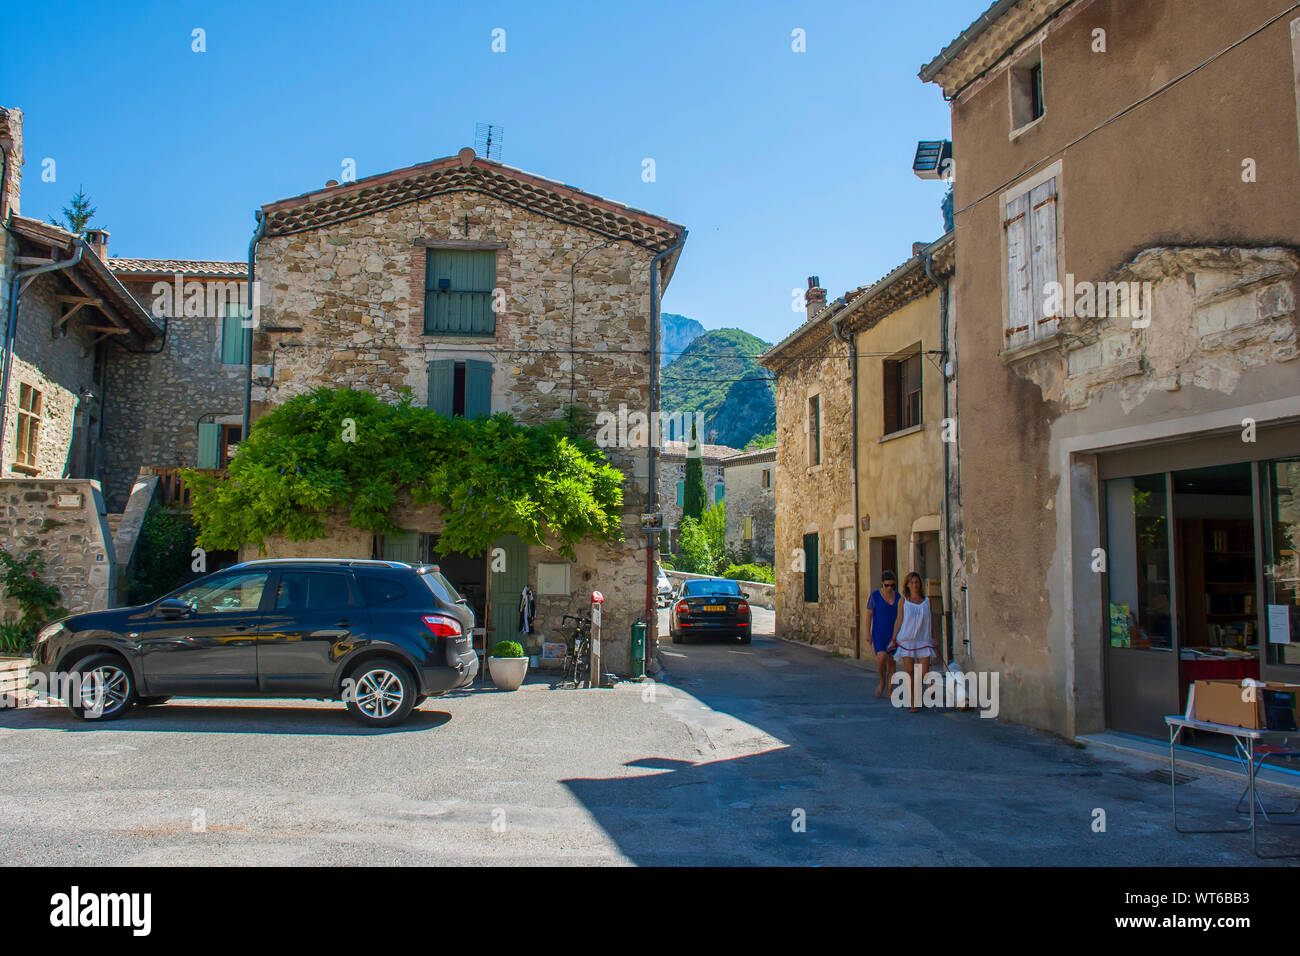 3 August 2015 A typical French town scene in the Provencal Drome region of South Eastern France Stock Photo